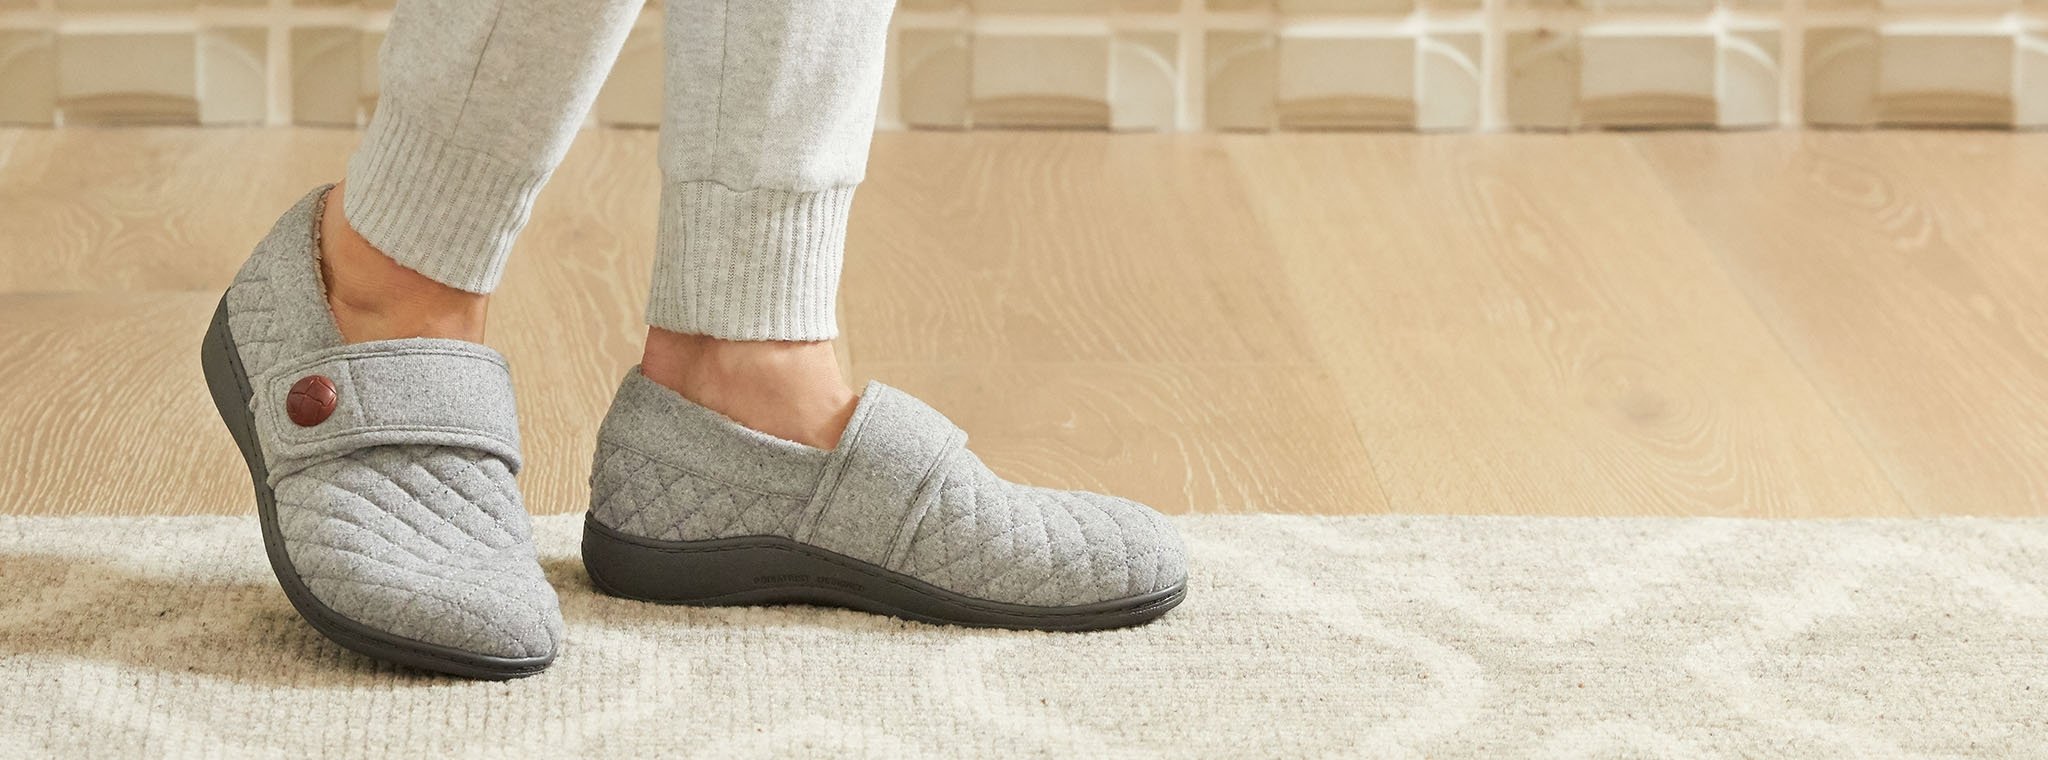 Orthotic Slippers for Women | Vionic Shoes